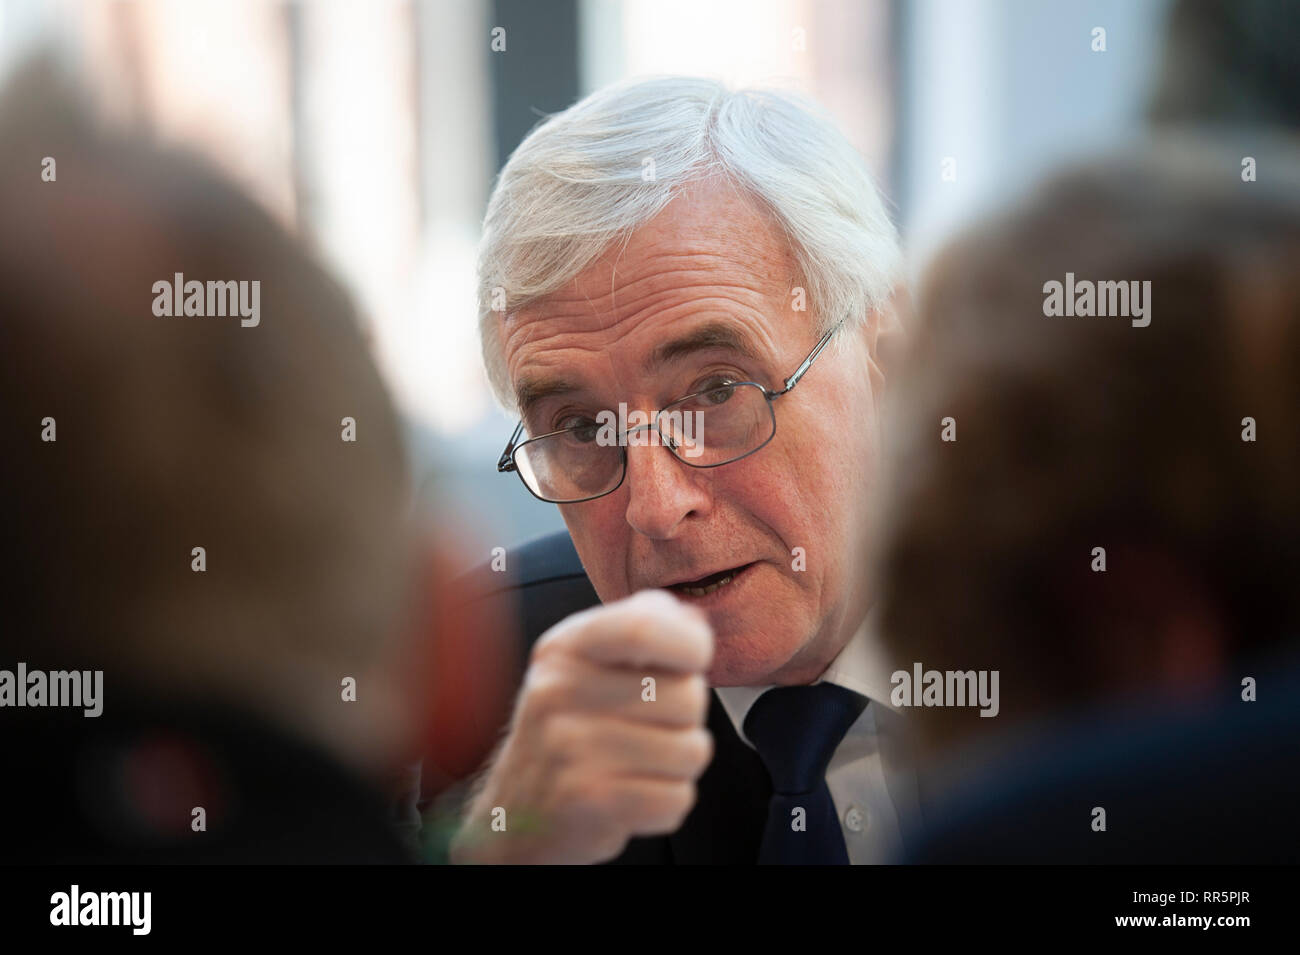 Wedge Group Galvanizing Ltd, Stafford Street, Willenhall, West Midlands, UK. 21st February 2019. John McDonnell MP, Labour’s Shadow Chancellor Stock Photo